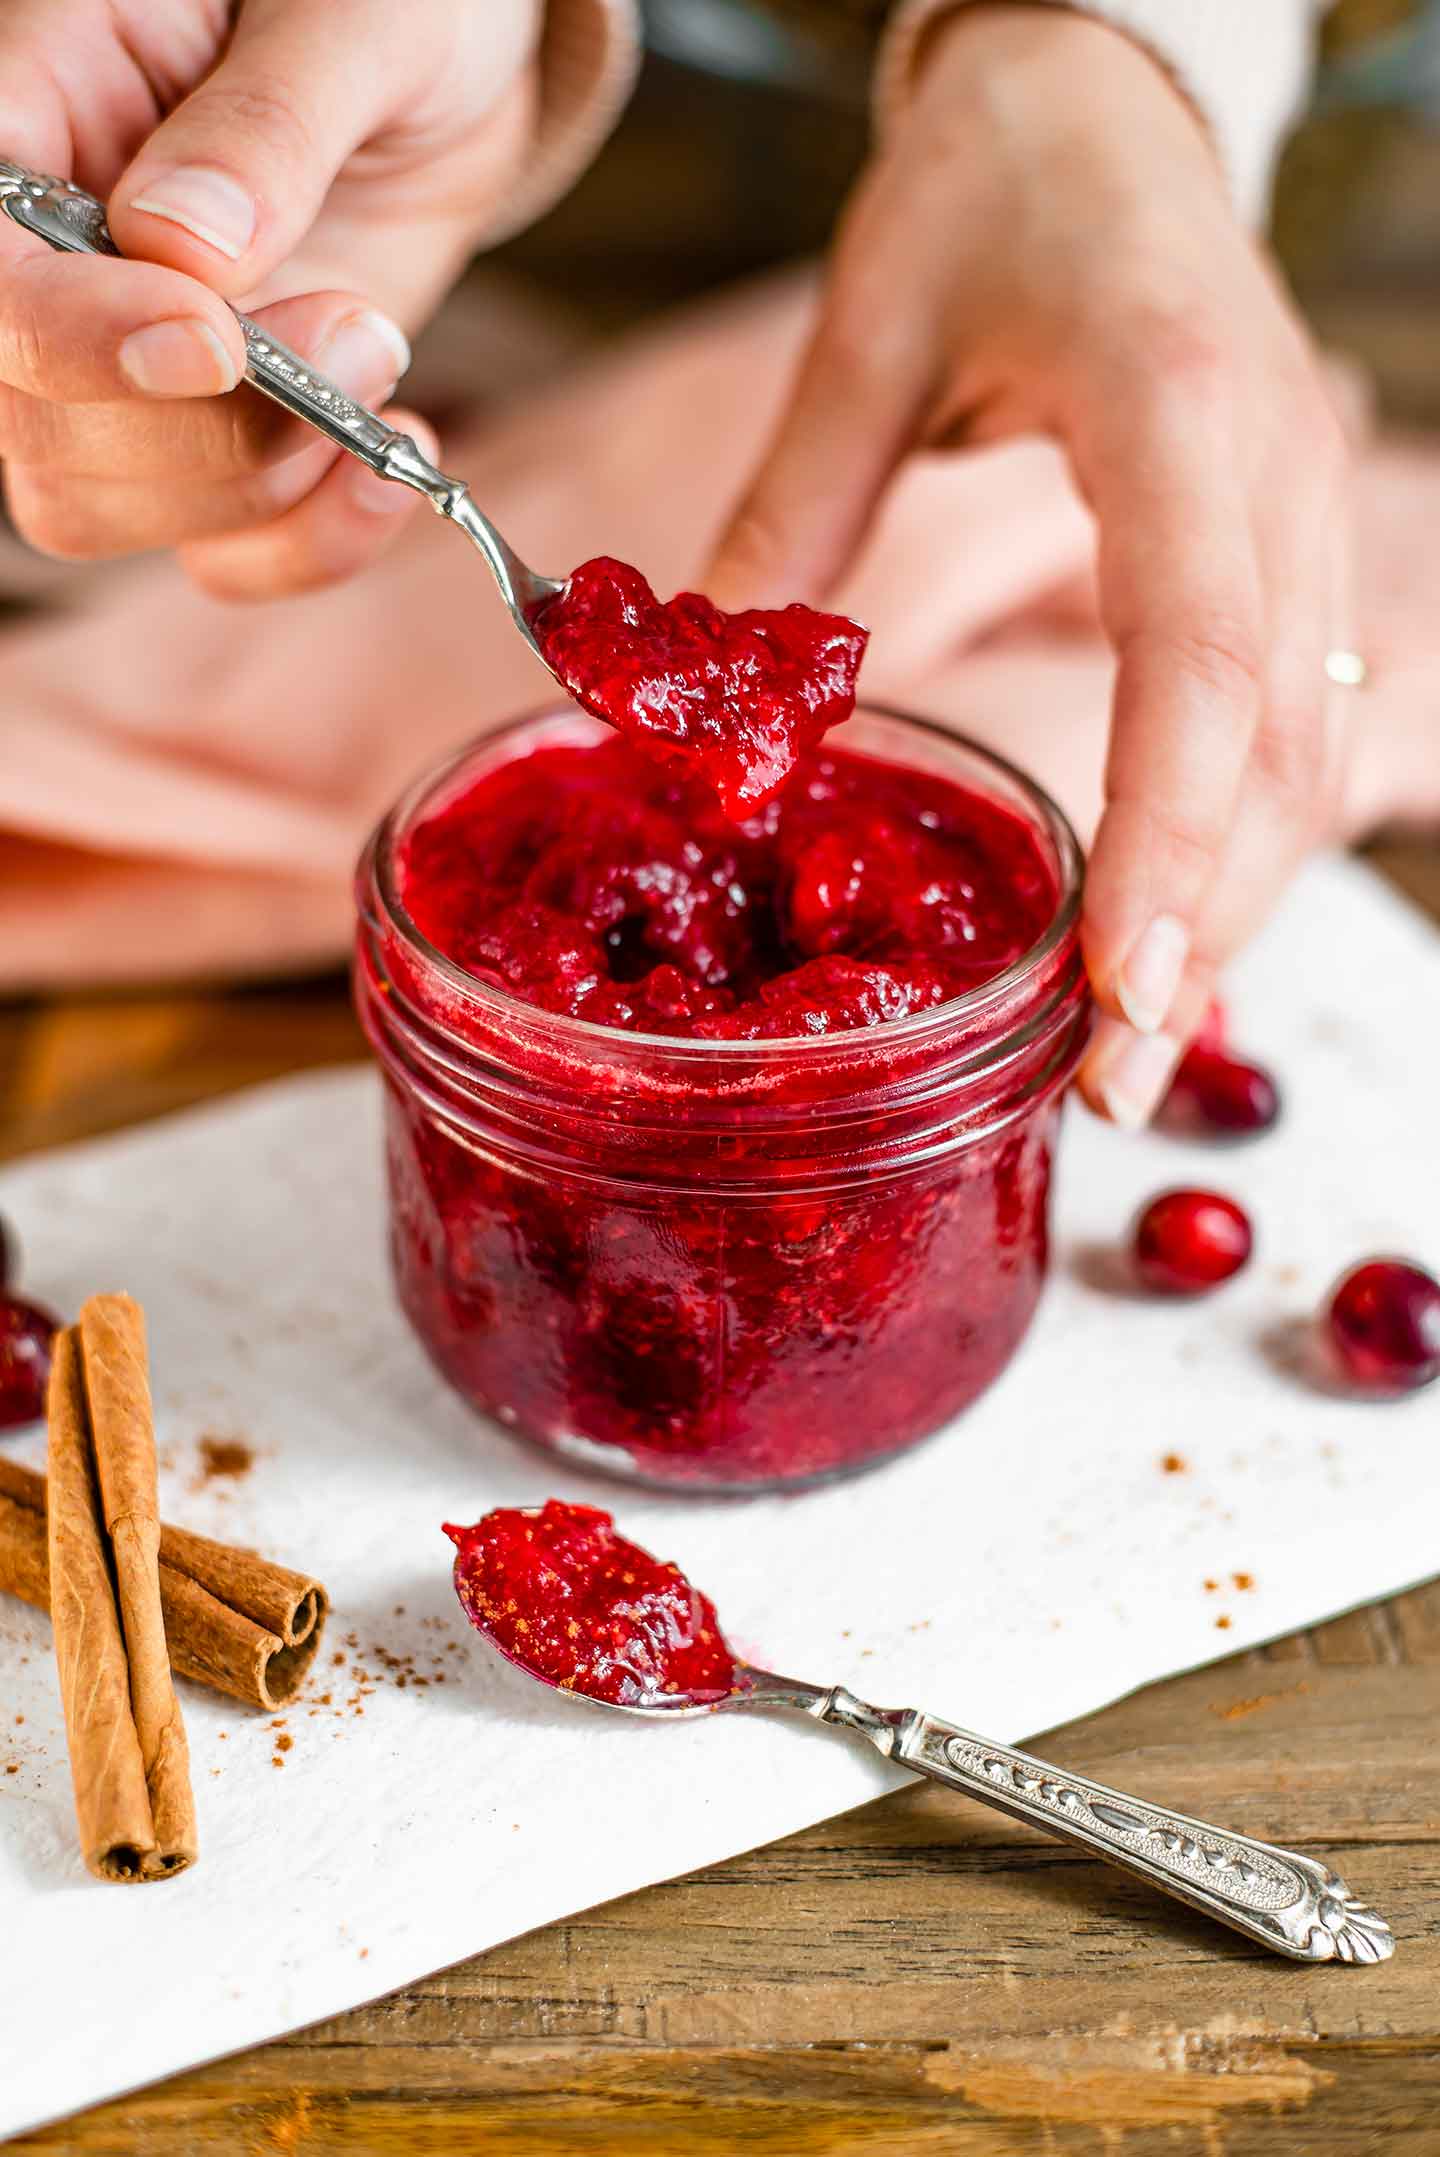 Side view of a hand lifting a spoon of cranberry sauce from a jar full of the red jam. Cinnamon sticks and fresh cranberries lay on a white tray surrounding the jar.